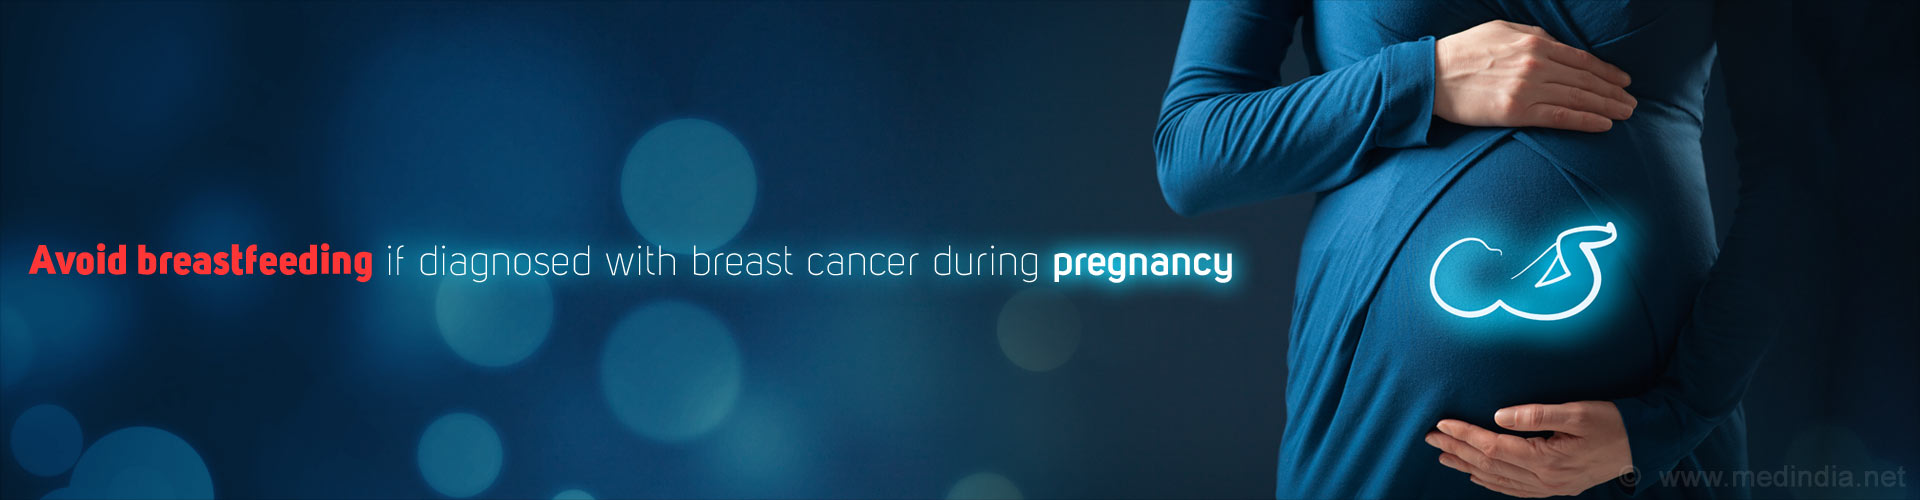 Avoid breastfeeding if diagnosed with breast cancer during pregnancy